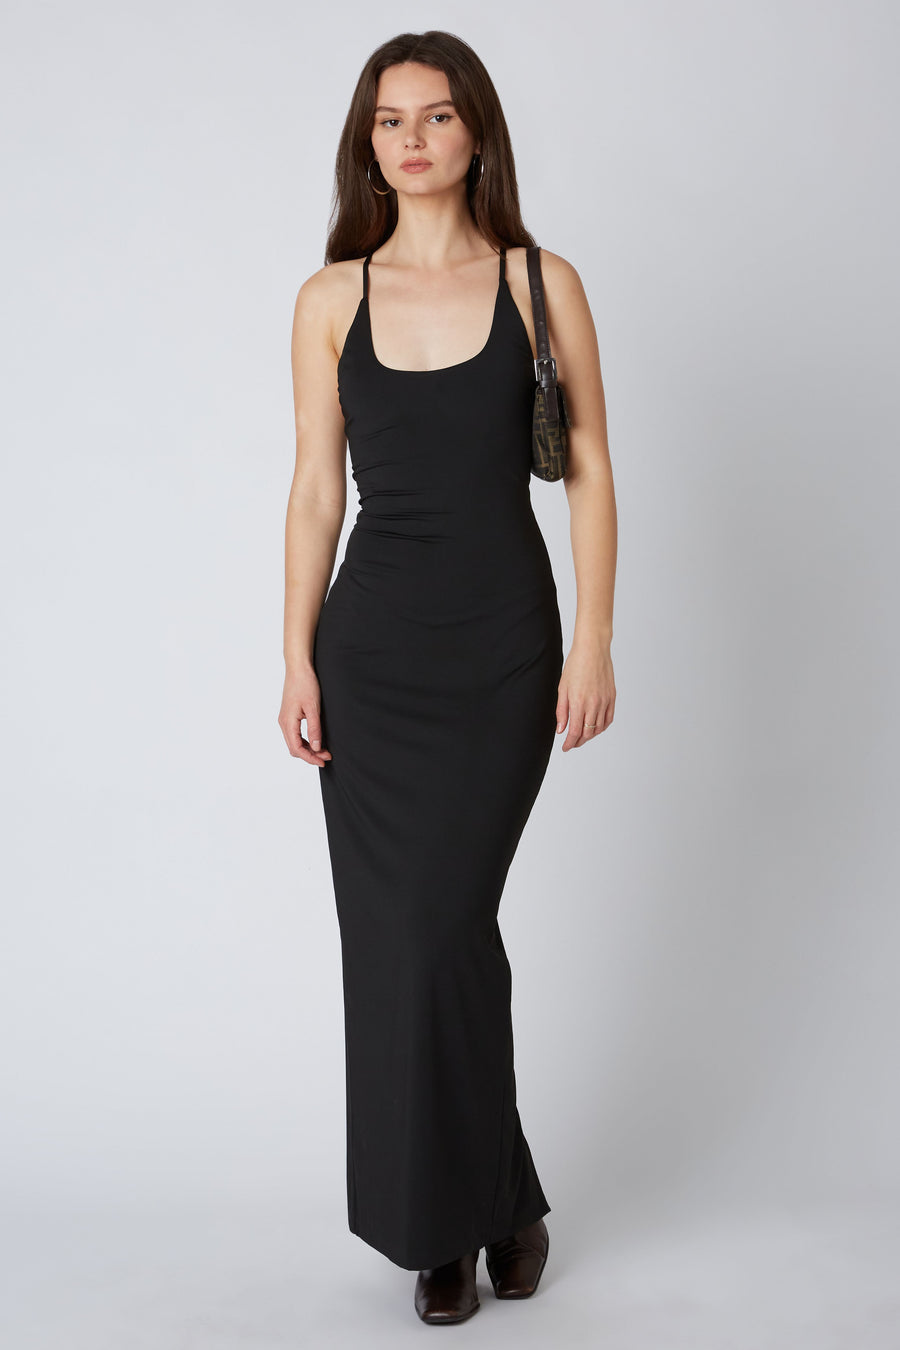 Model is wearing a maxi dress with halter neckline.